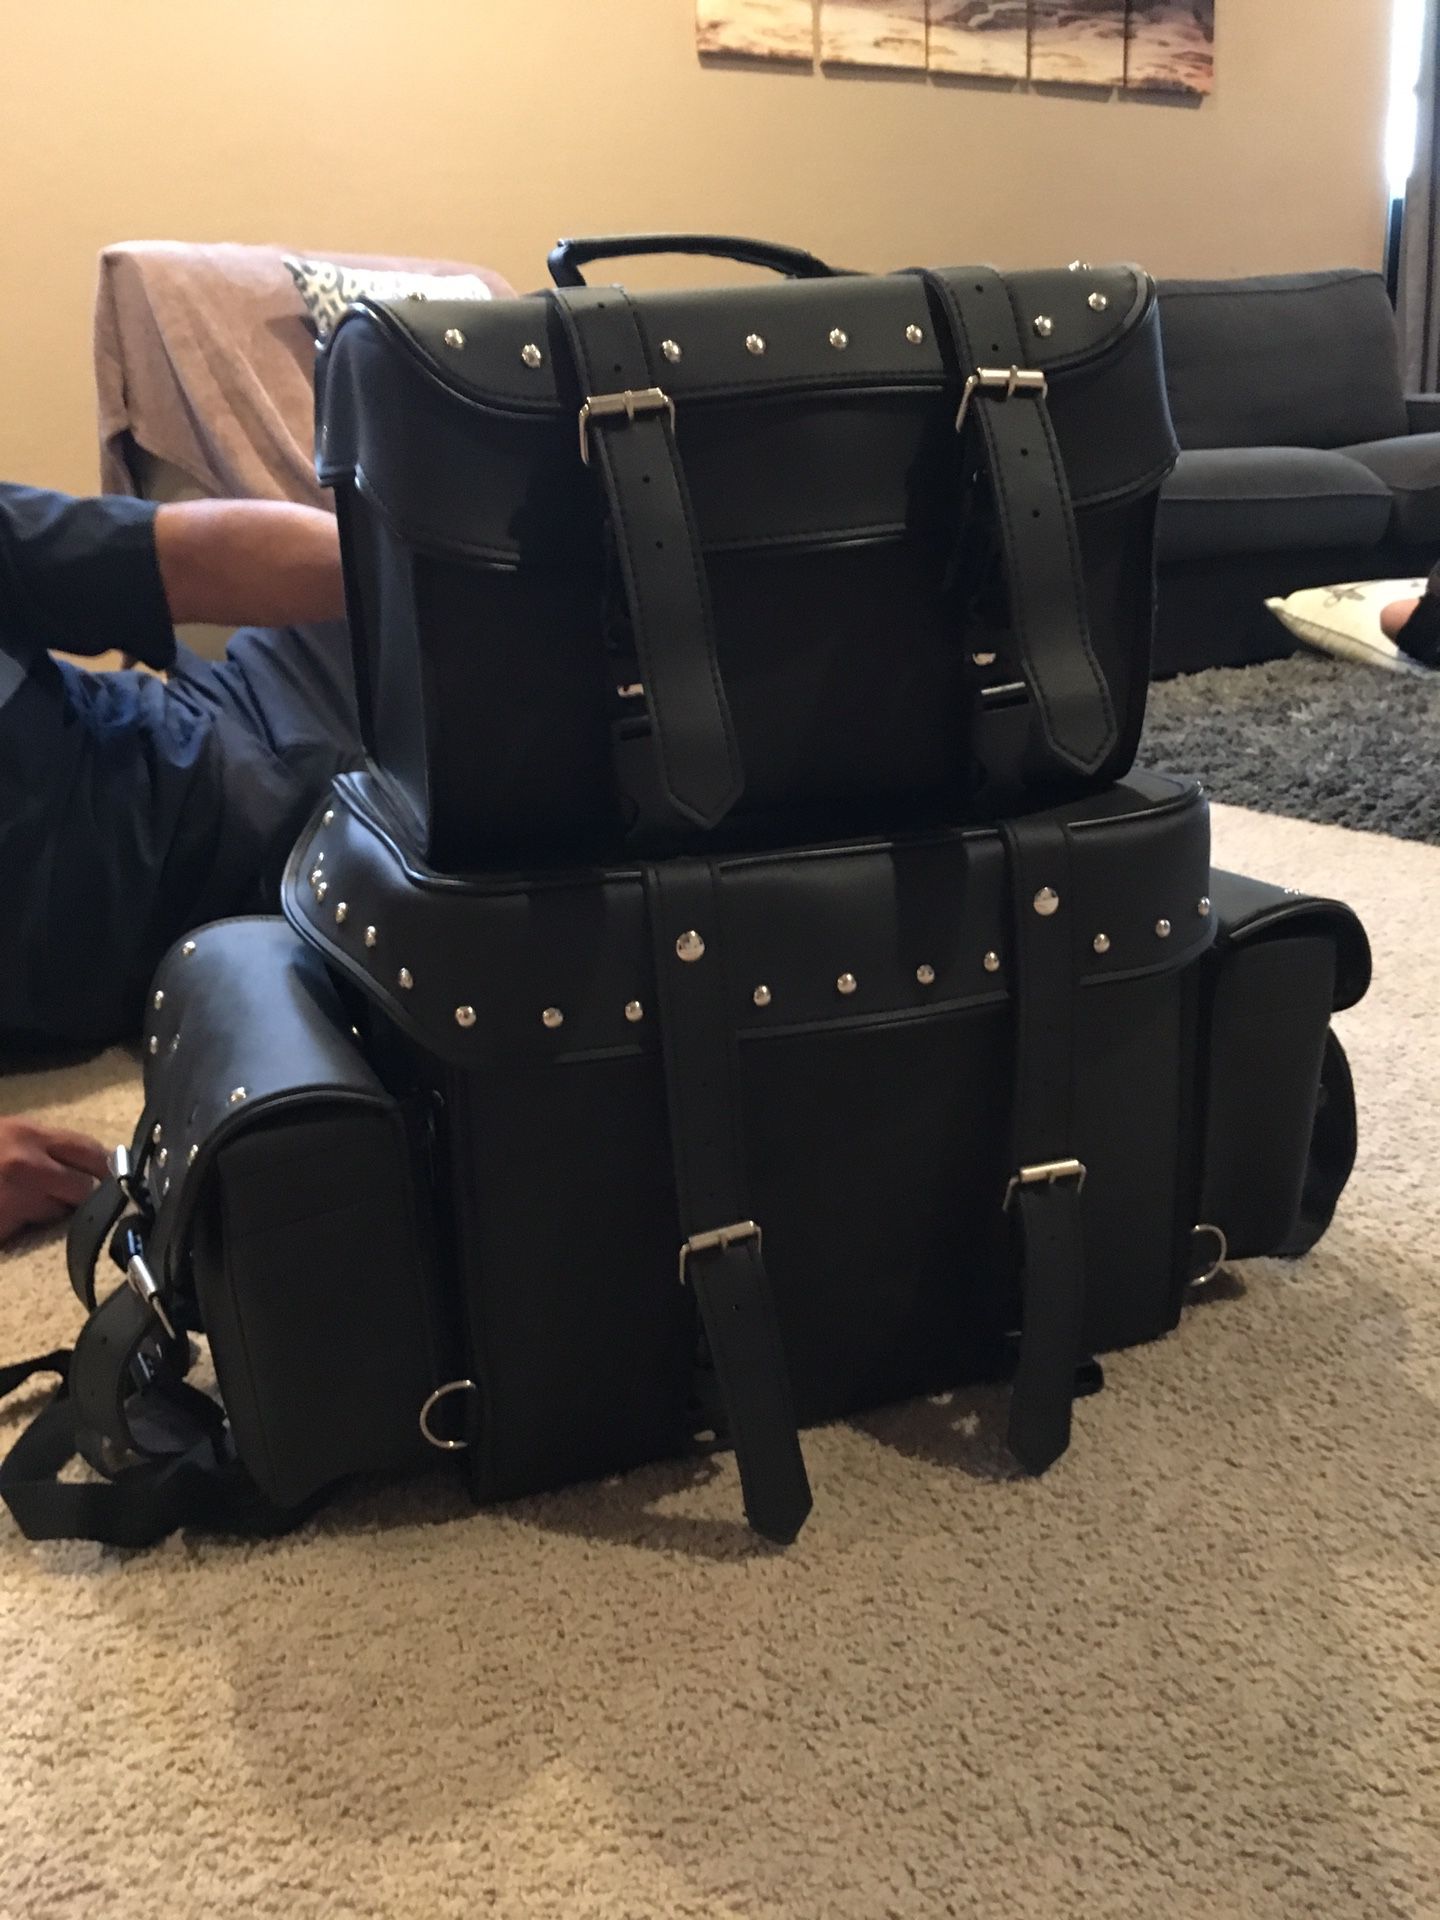 Touring luggage set for motorcycle